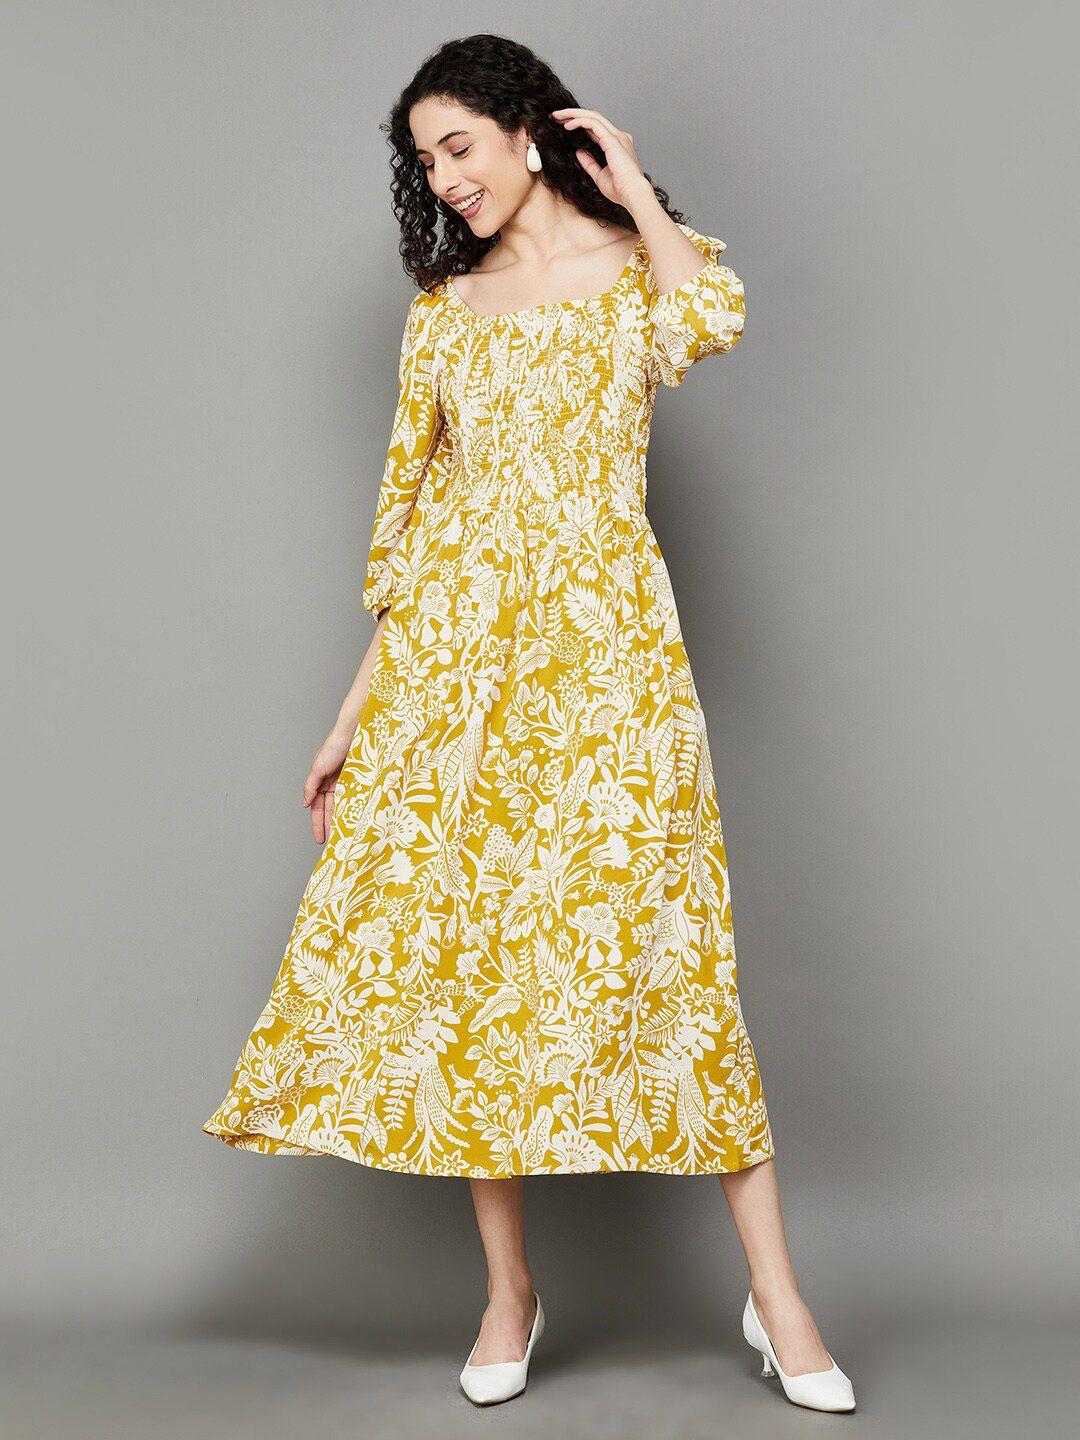 colour me by melange floral printed smocked detailed puff sleeve fit & flare dress